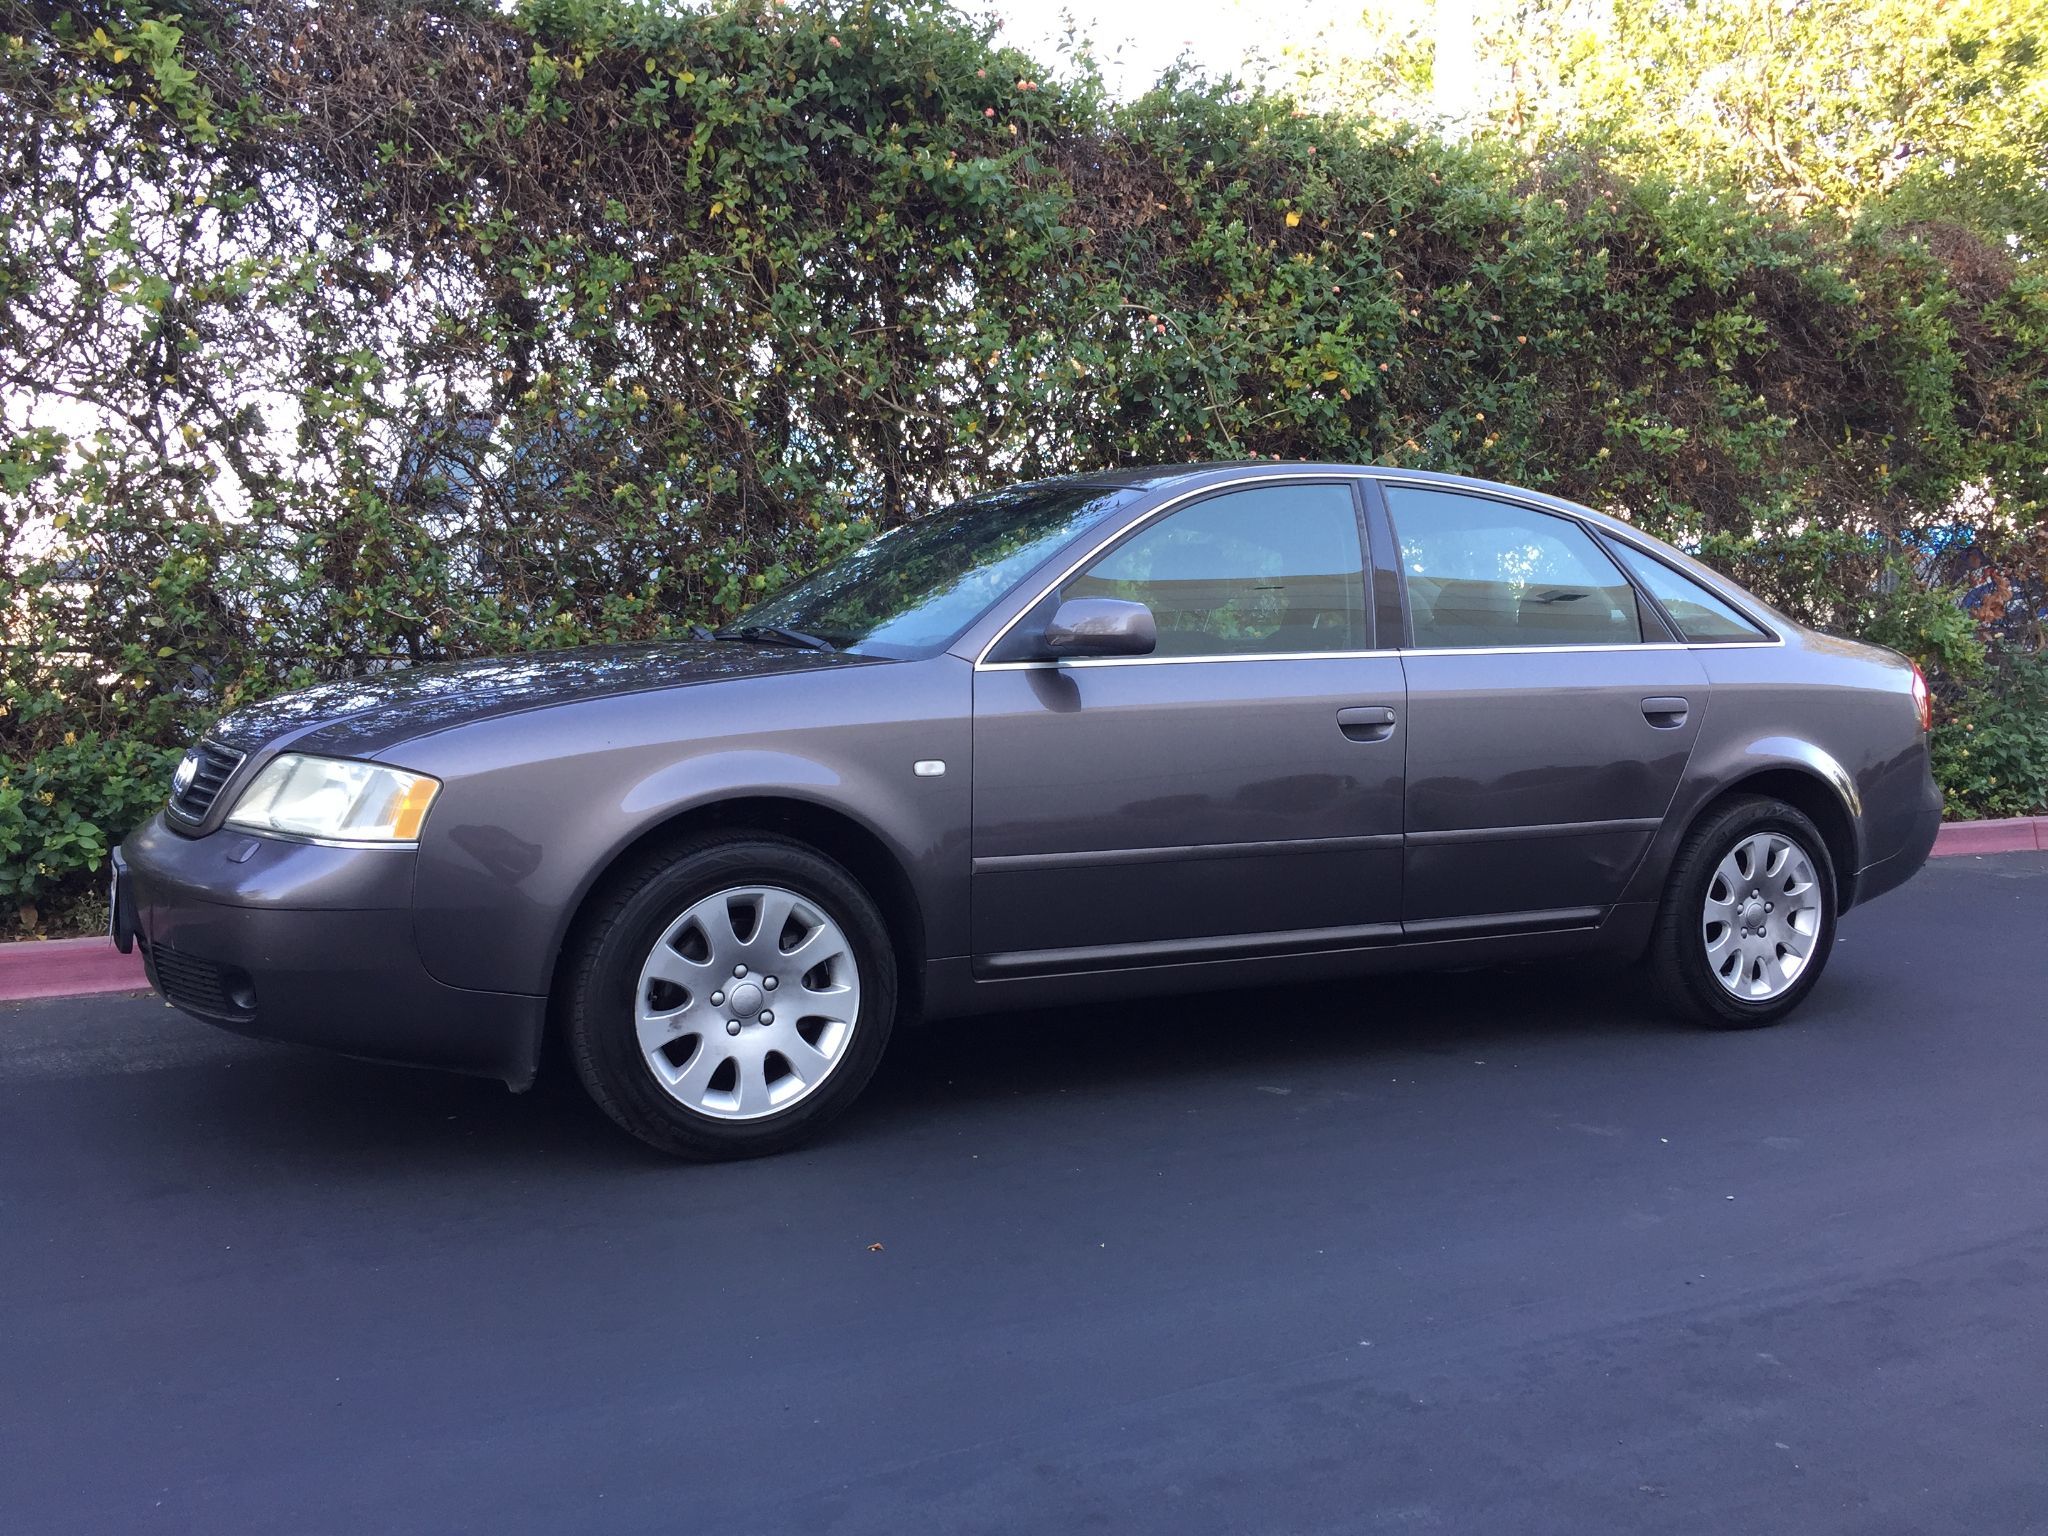 Used 1999 Audi A6 2.8 QUATTRO at City Cars Warehouse INC